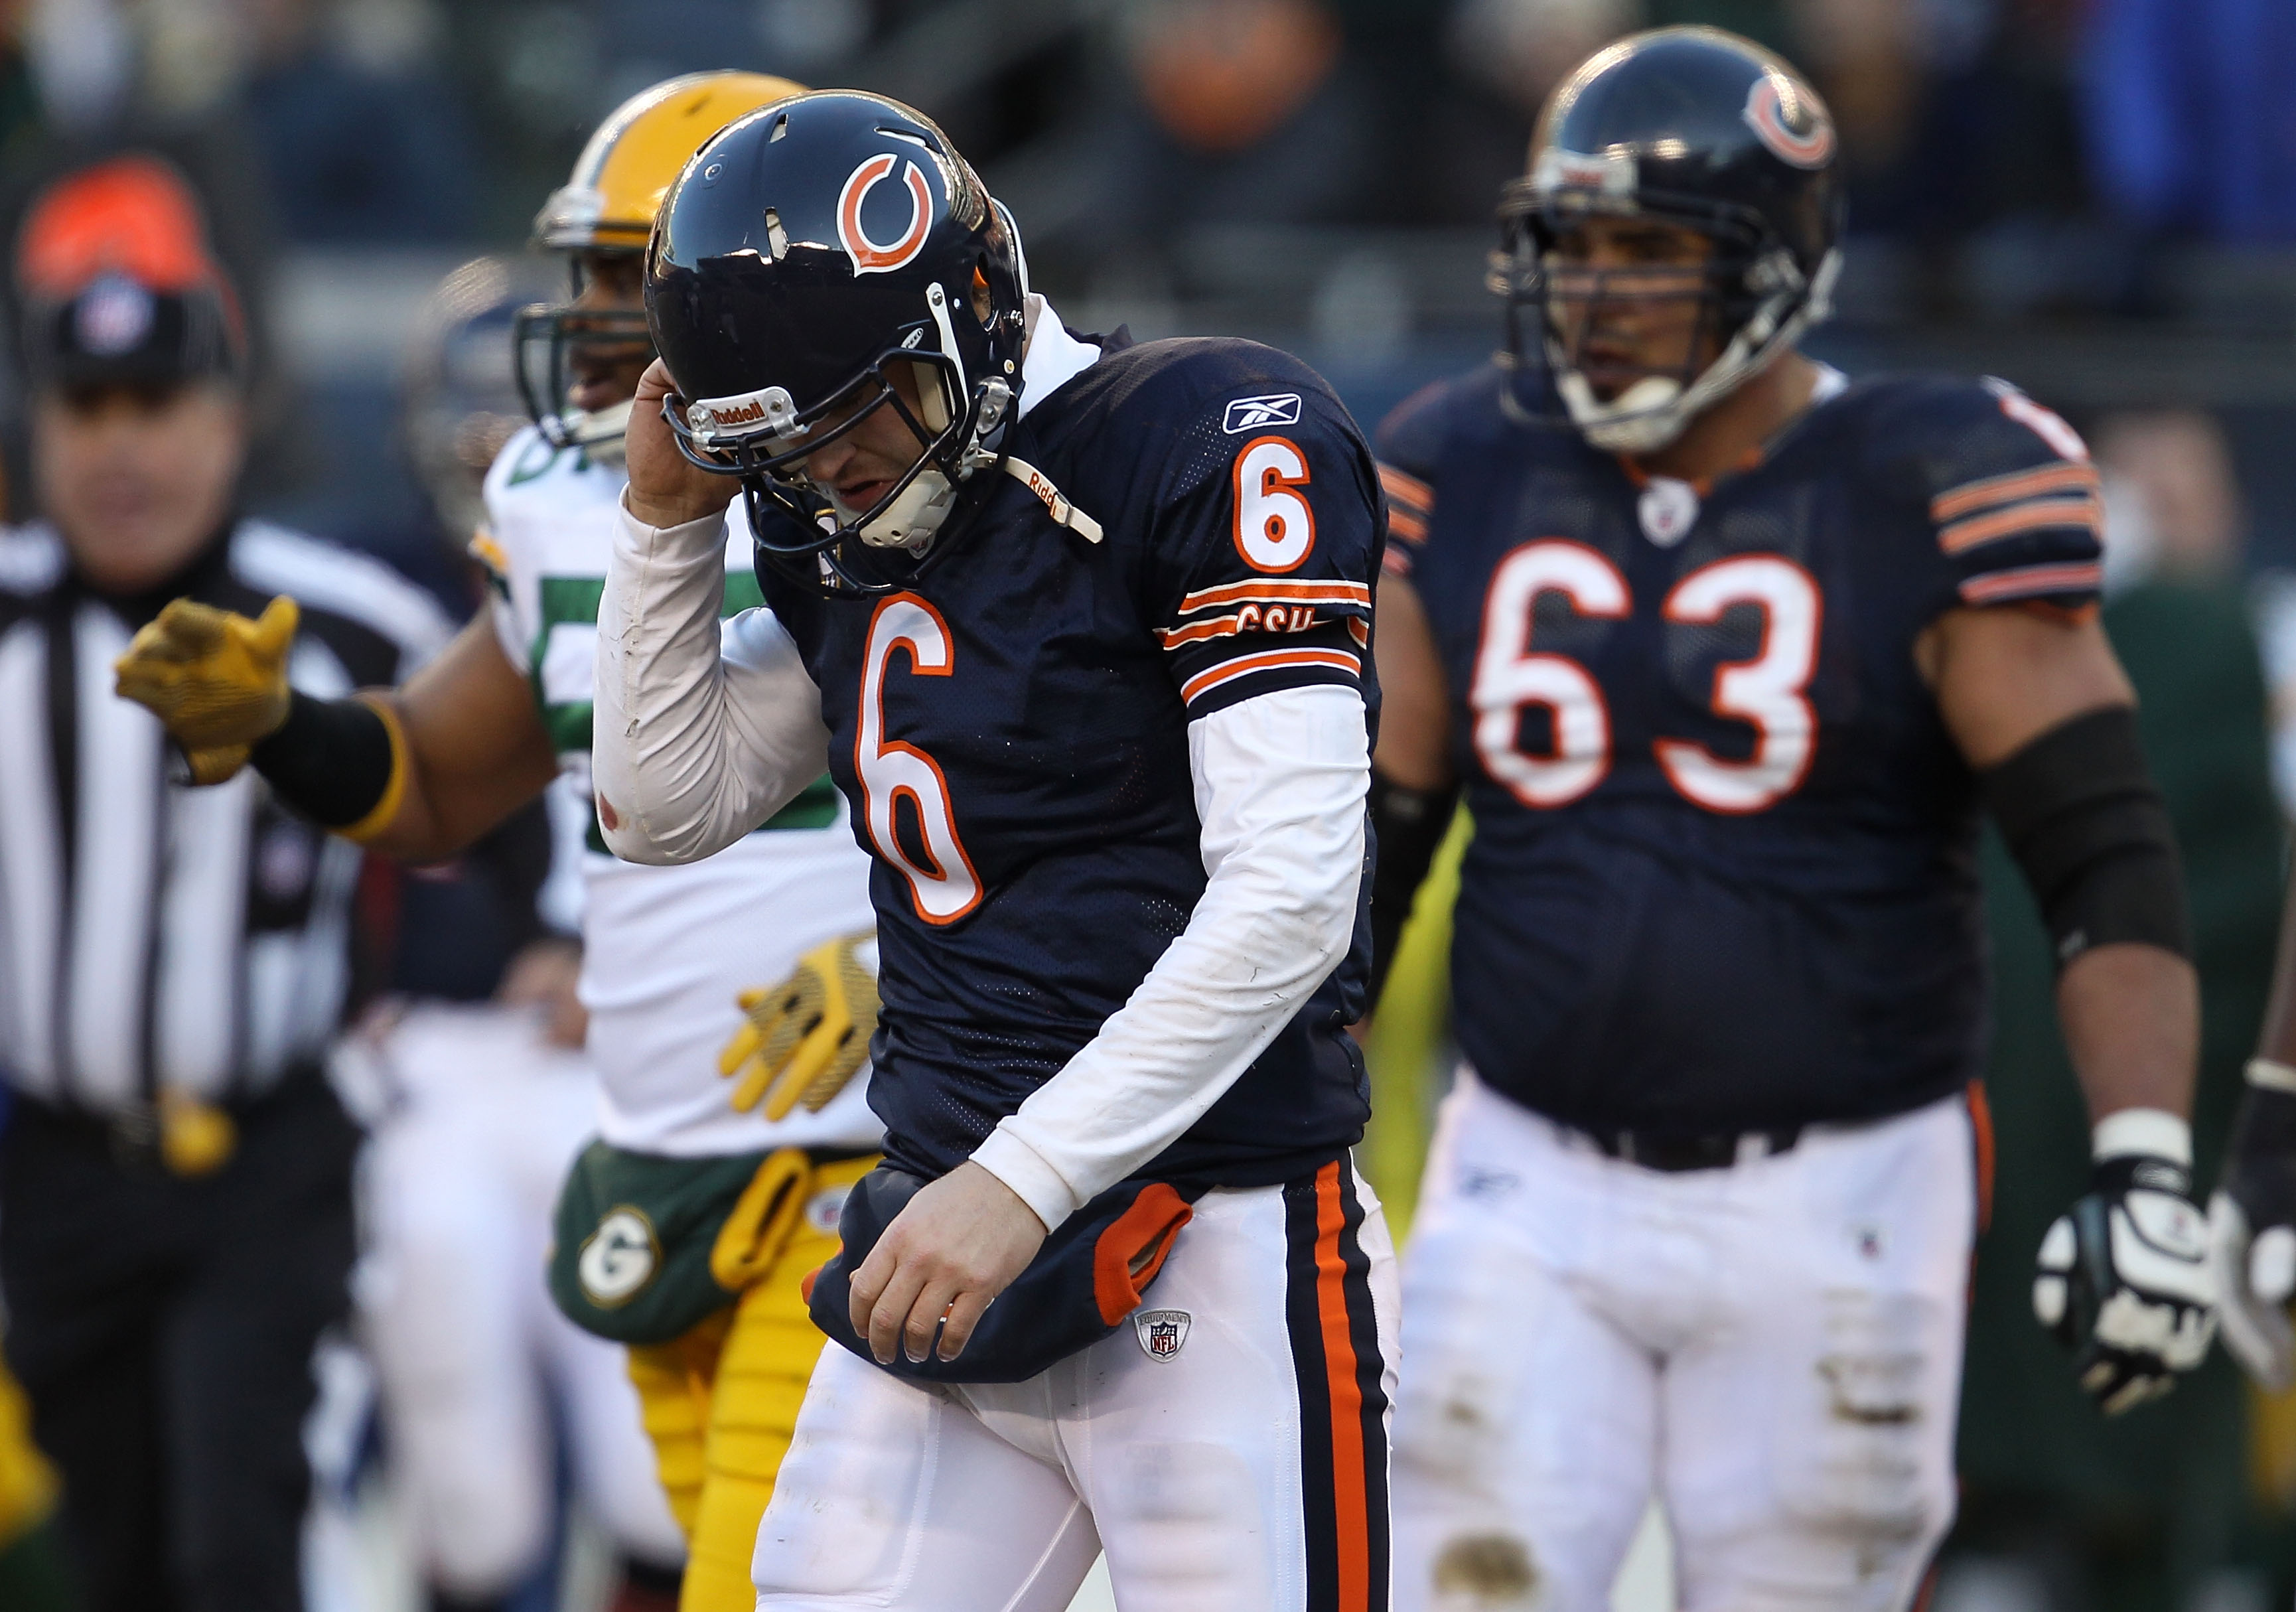 CHICAGO, IL - JANUARY 23:  Quarterback Jay Cutler #6 of the Chicago Bears reacts in the second quarter against the Green Bay Packers in the NFC Championship Game at Soldier Field on January 23, 2011 in Chicago, Illinois.  (Photo by Jonathan Daniel/Getty I